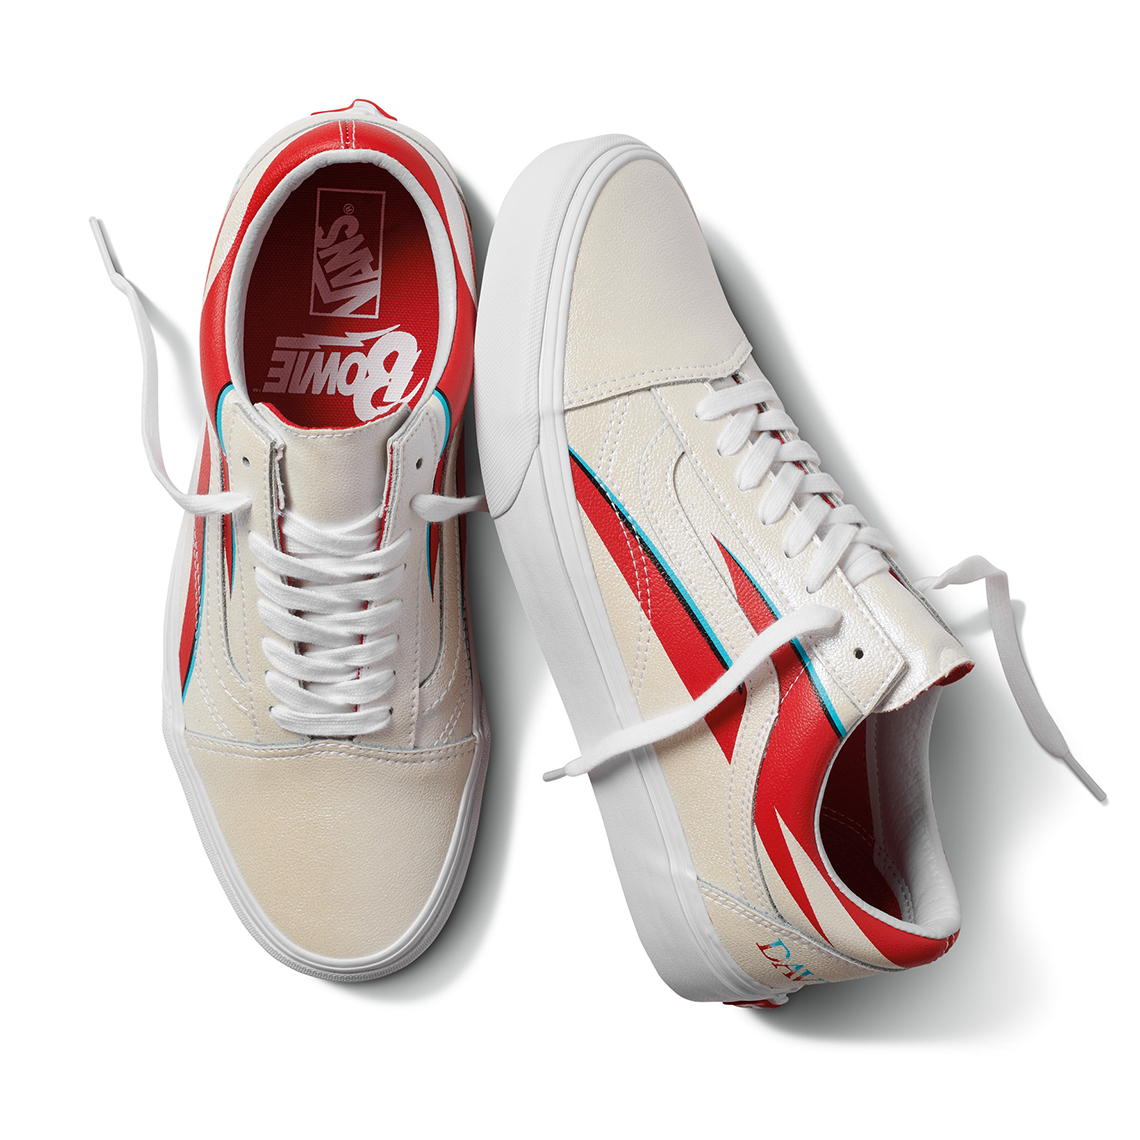 Vans releases David Bowie-inspired collection